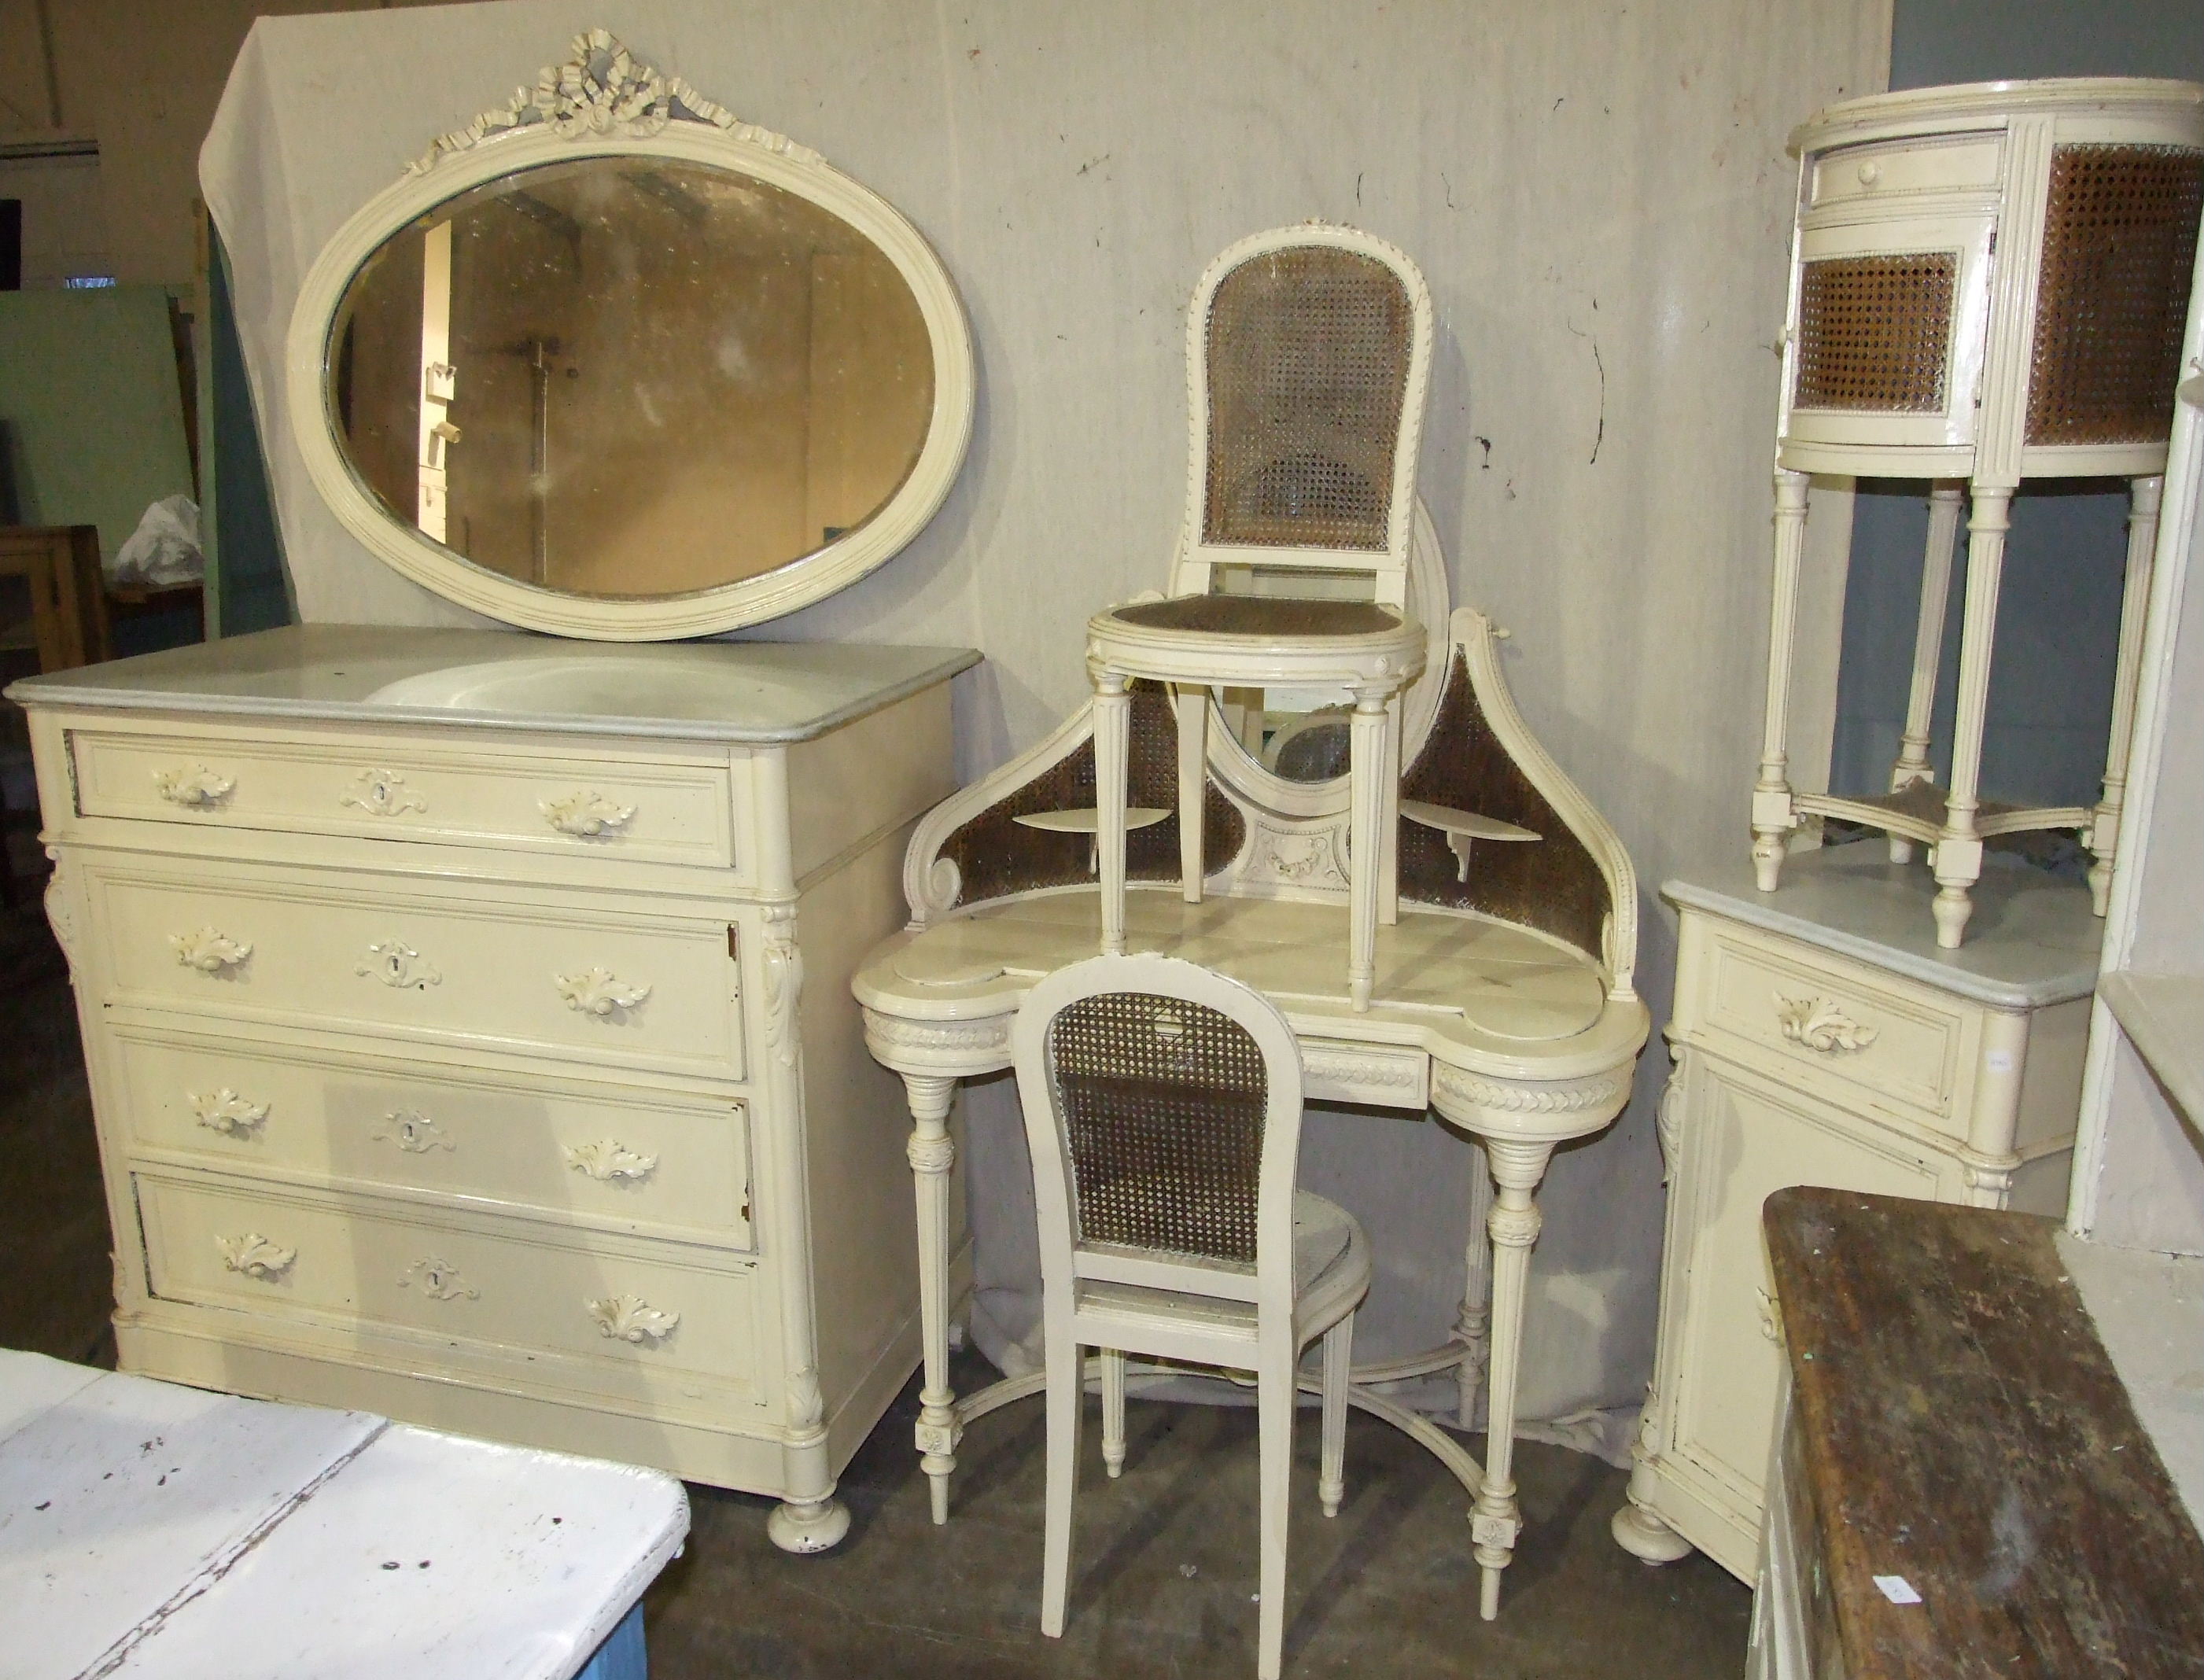 A 19th century Continental painted wood dressing table with double caned panels, drawer and